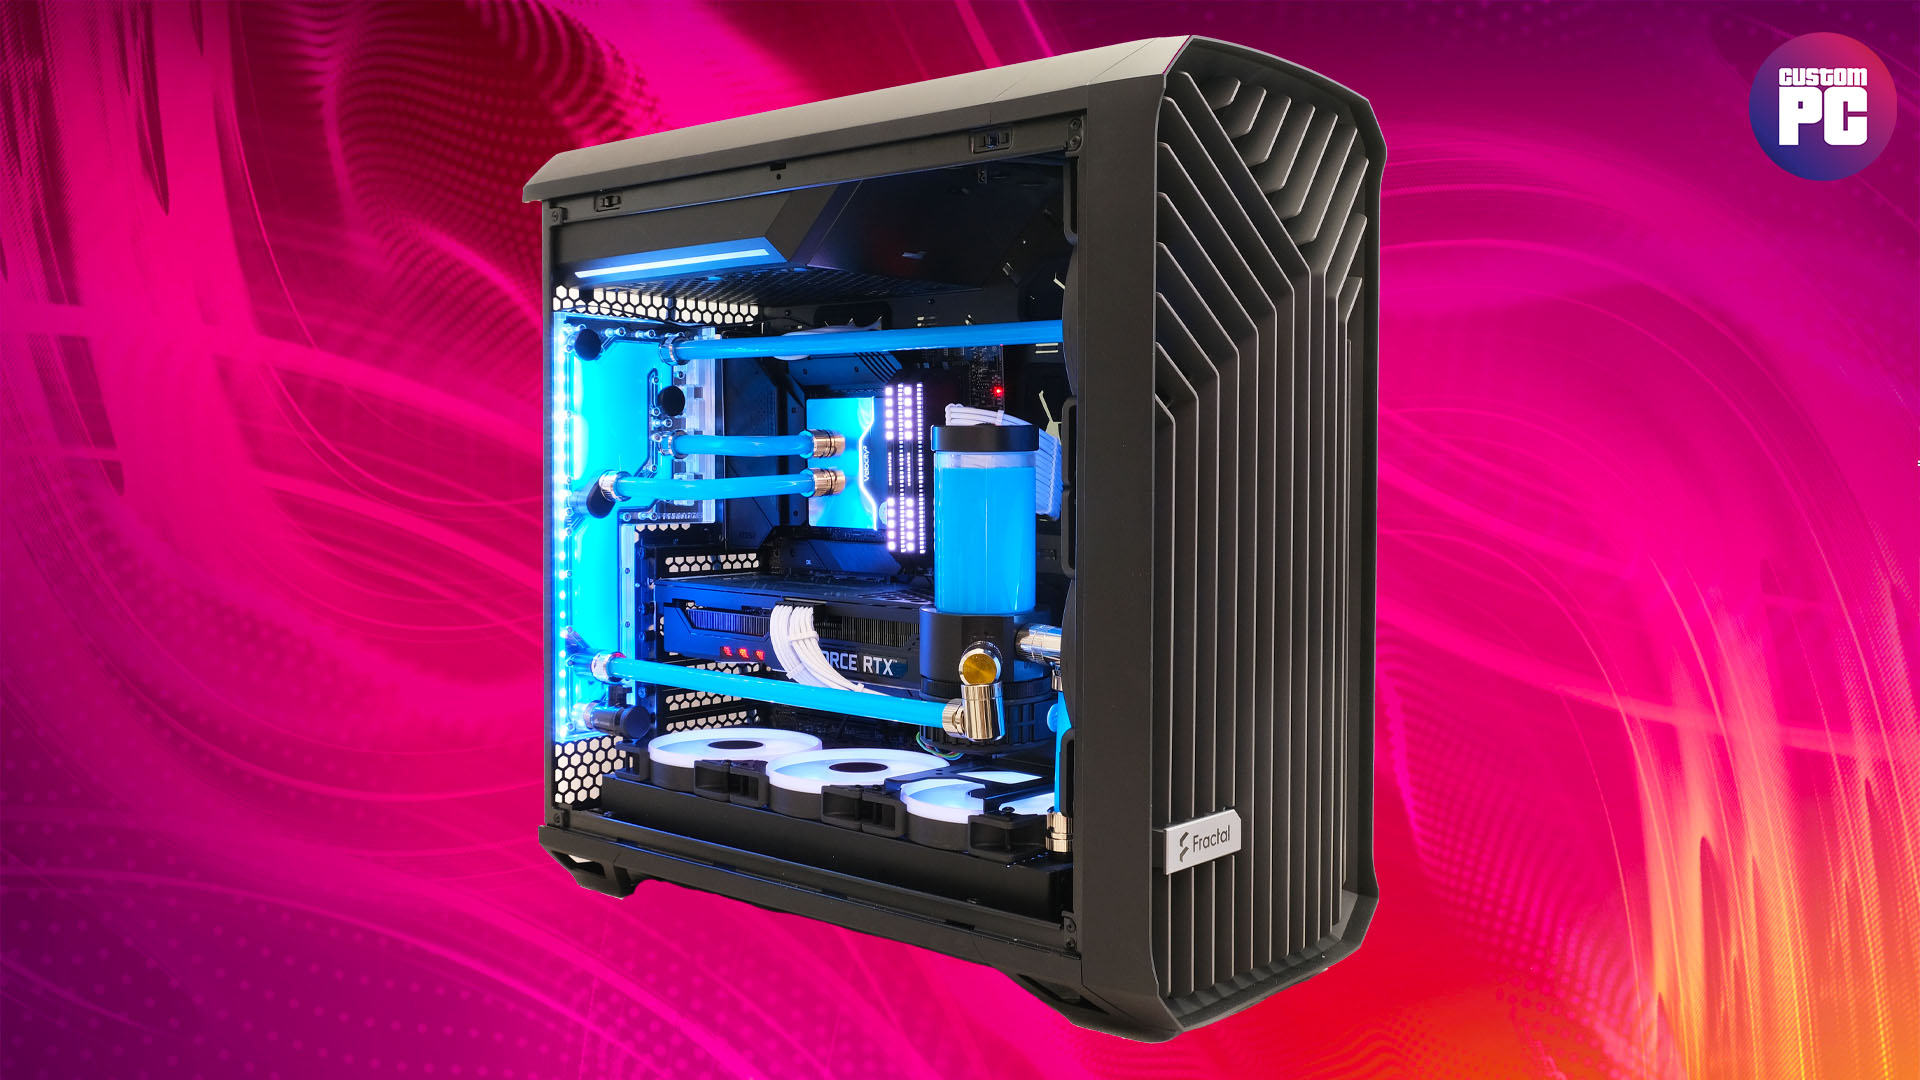 Best PC case: Fractal Design Torrent with water-cooled PC